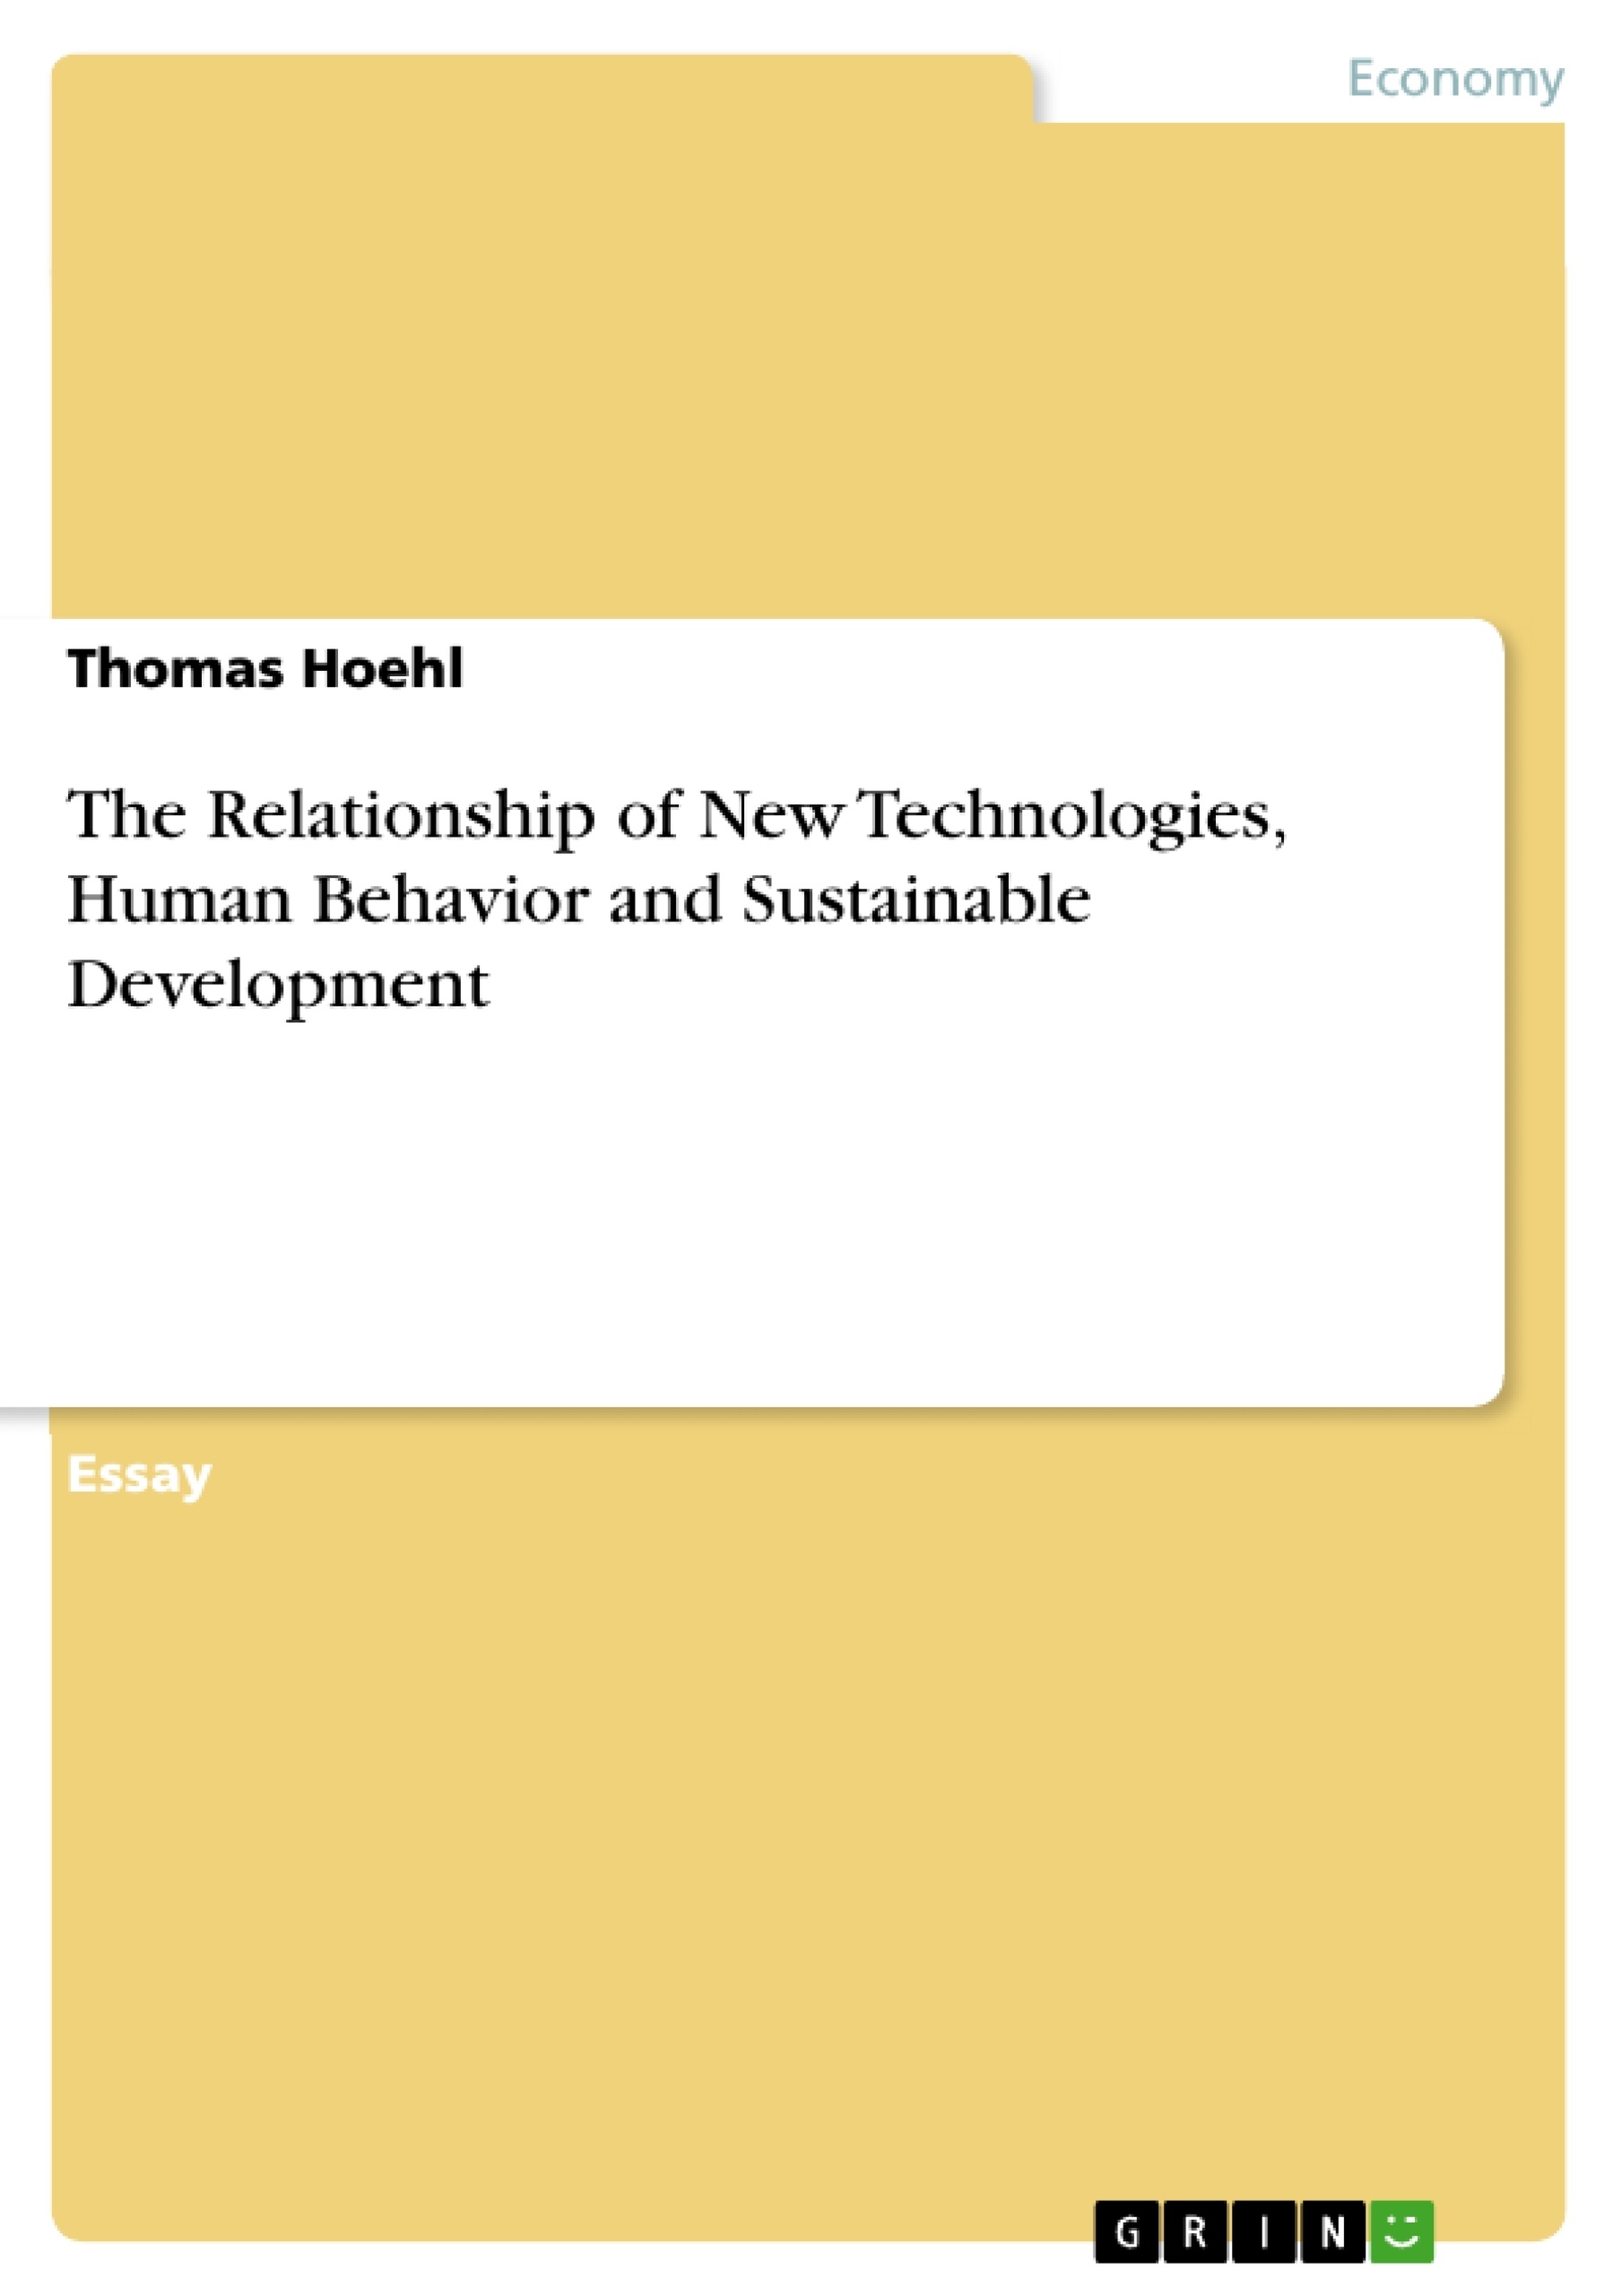 Título: The Relationship of New Technologies, Human Behavior and Sustainable Development